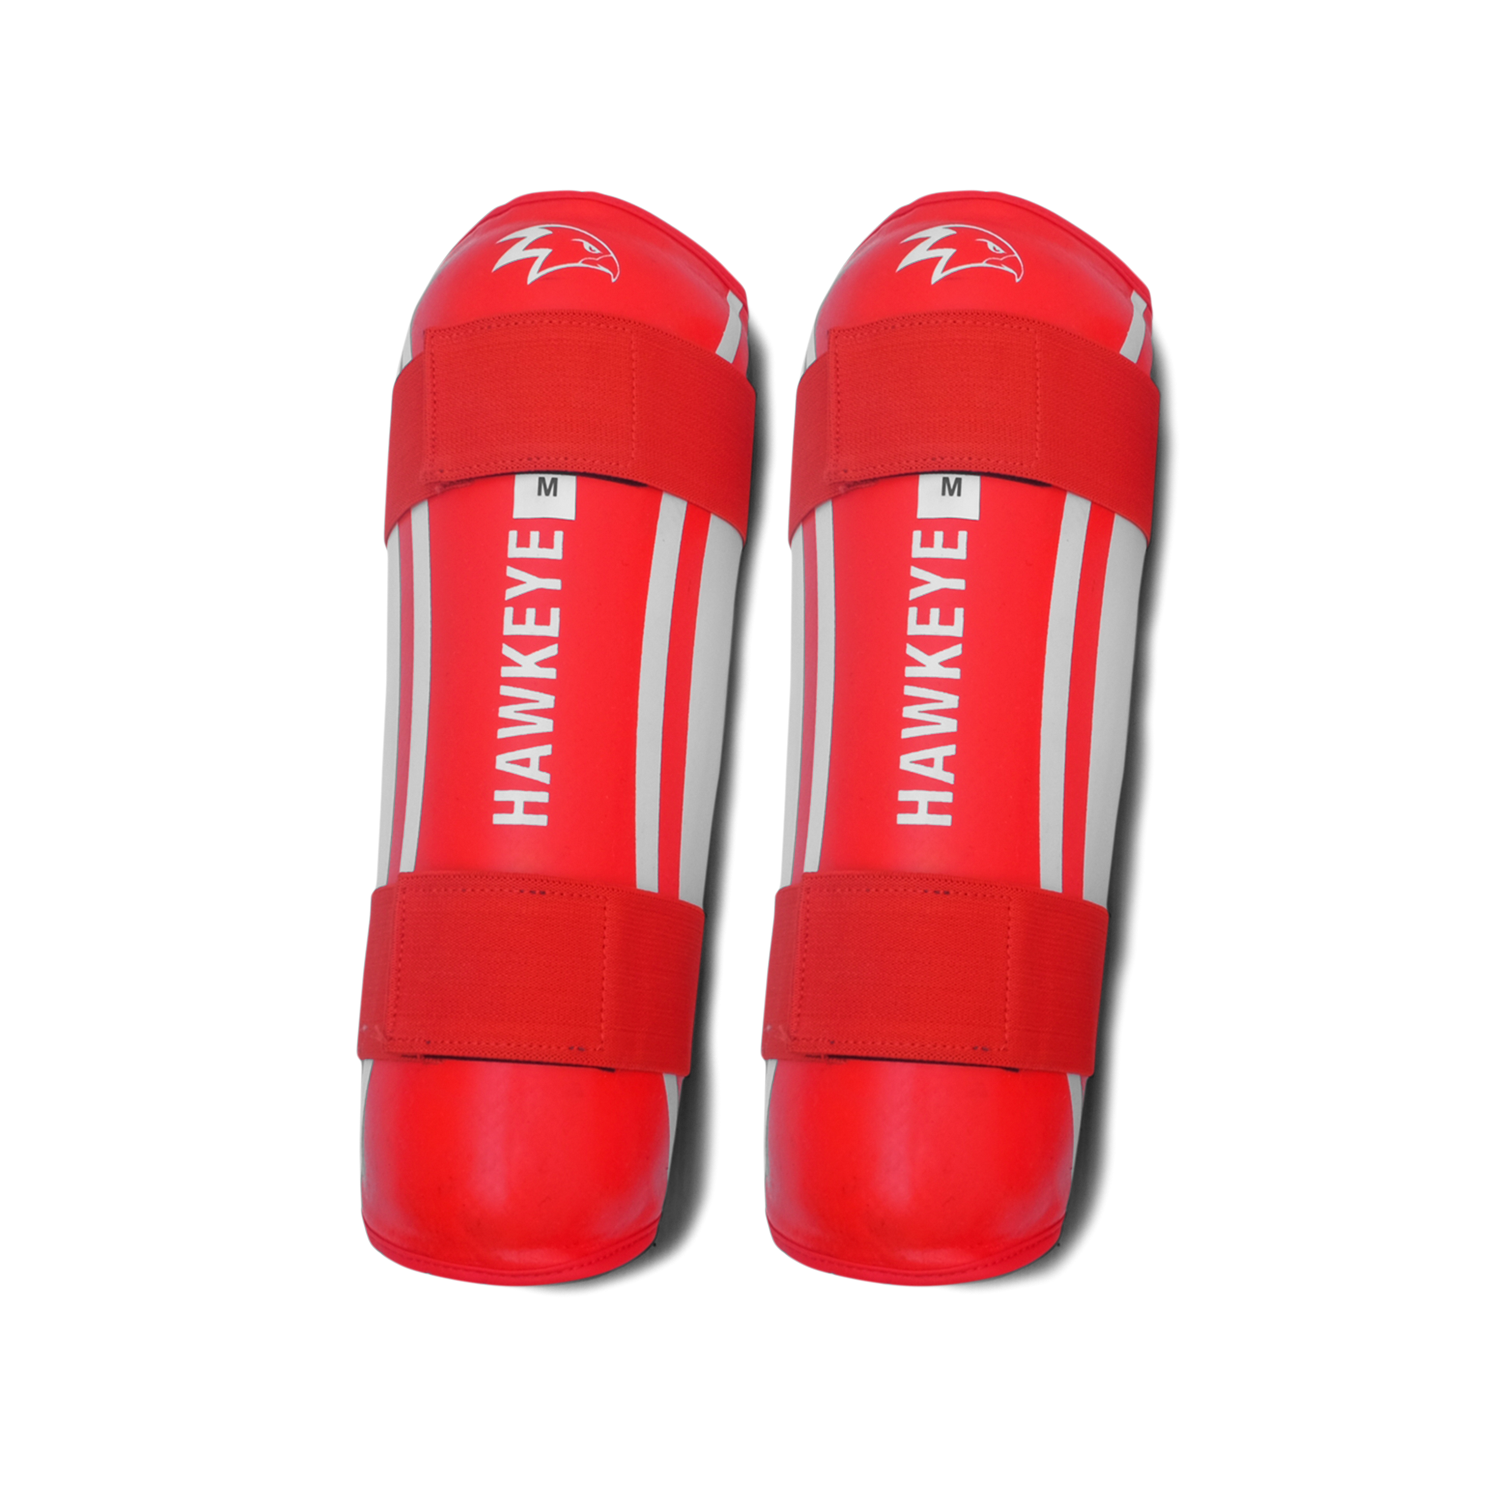 Achieve Pearly Red Shin Guard